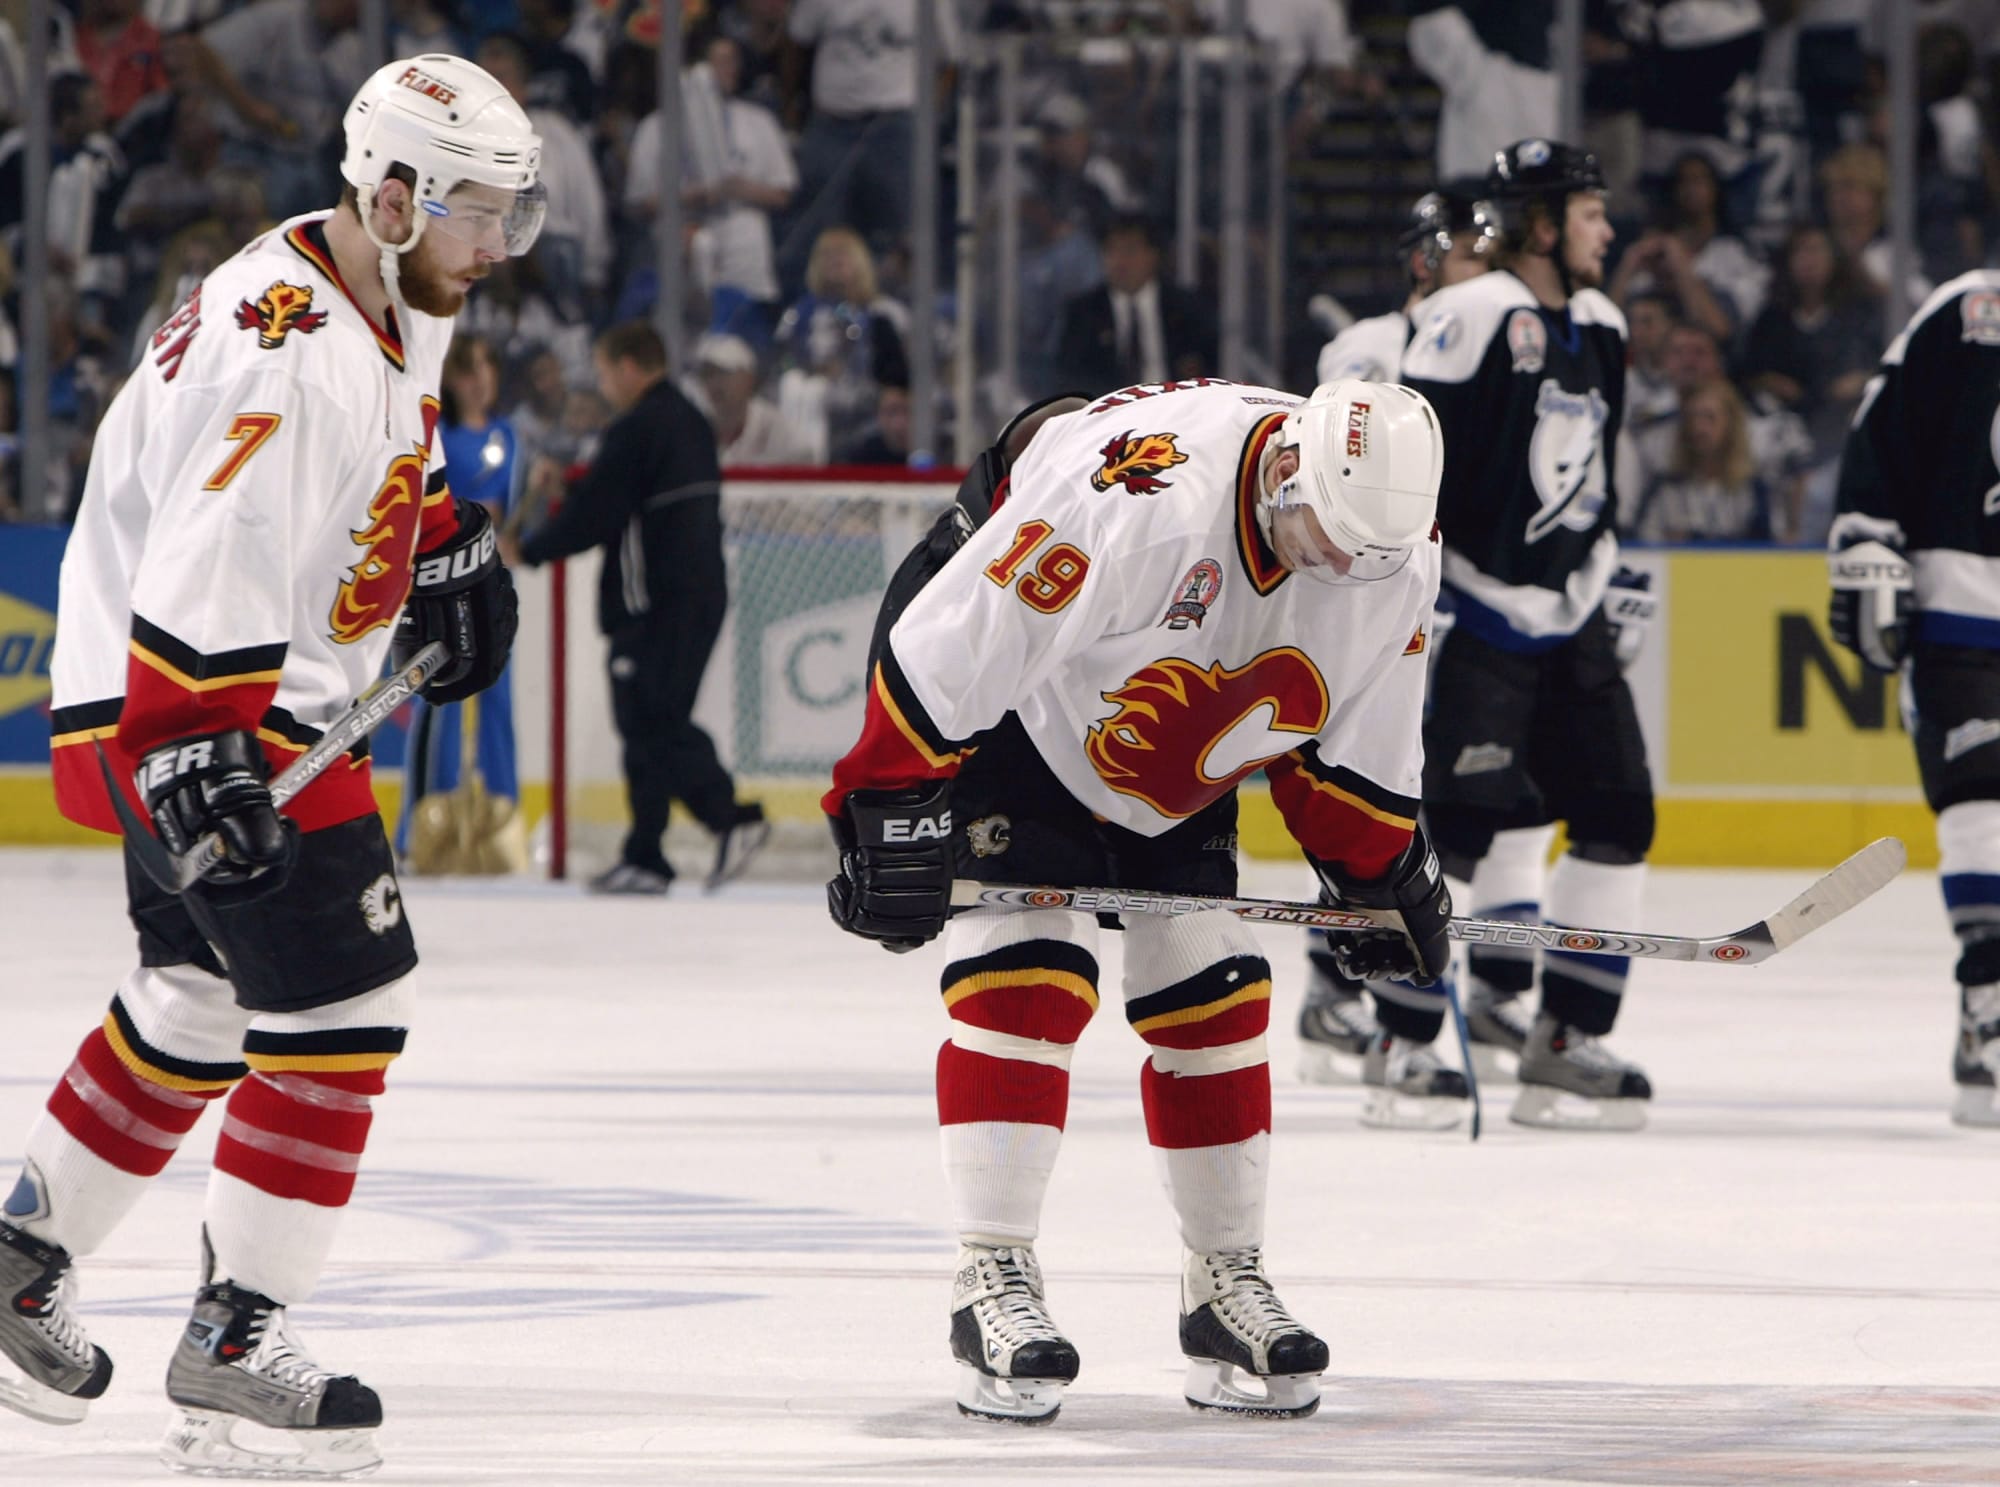 Calgary Flames Throwback Thursday: A Day We All Remember